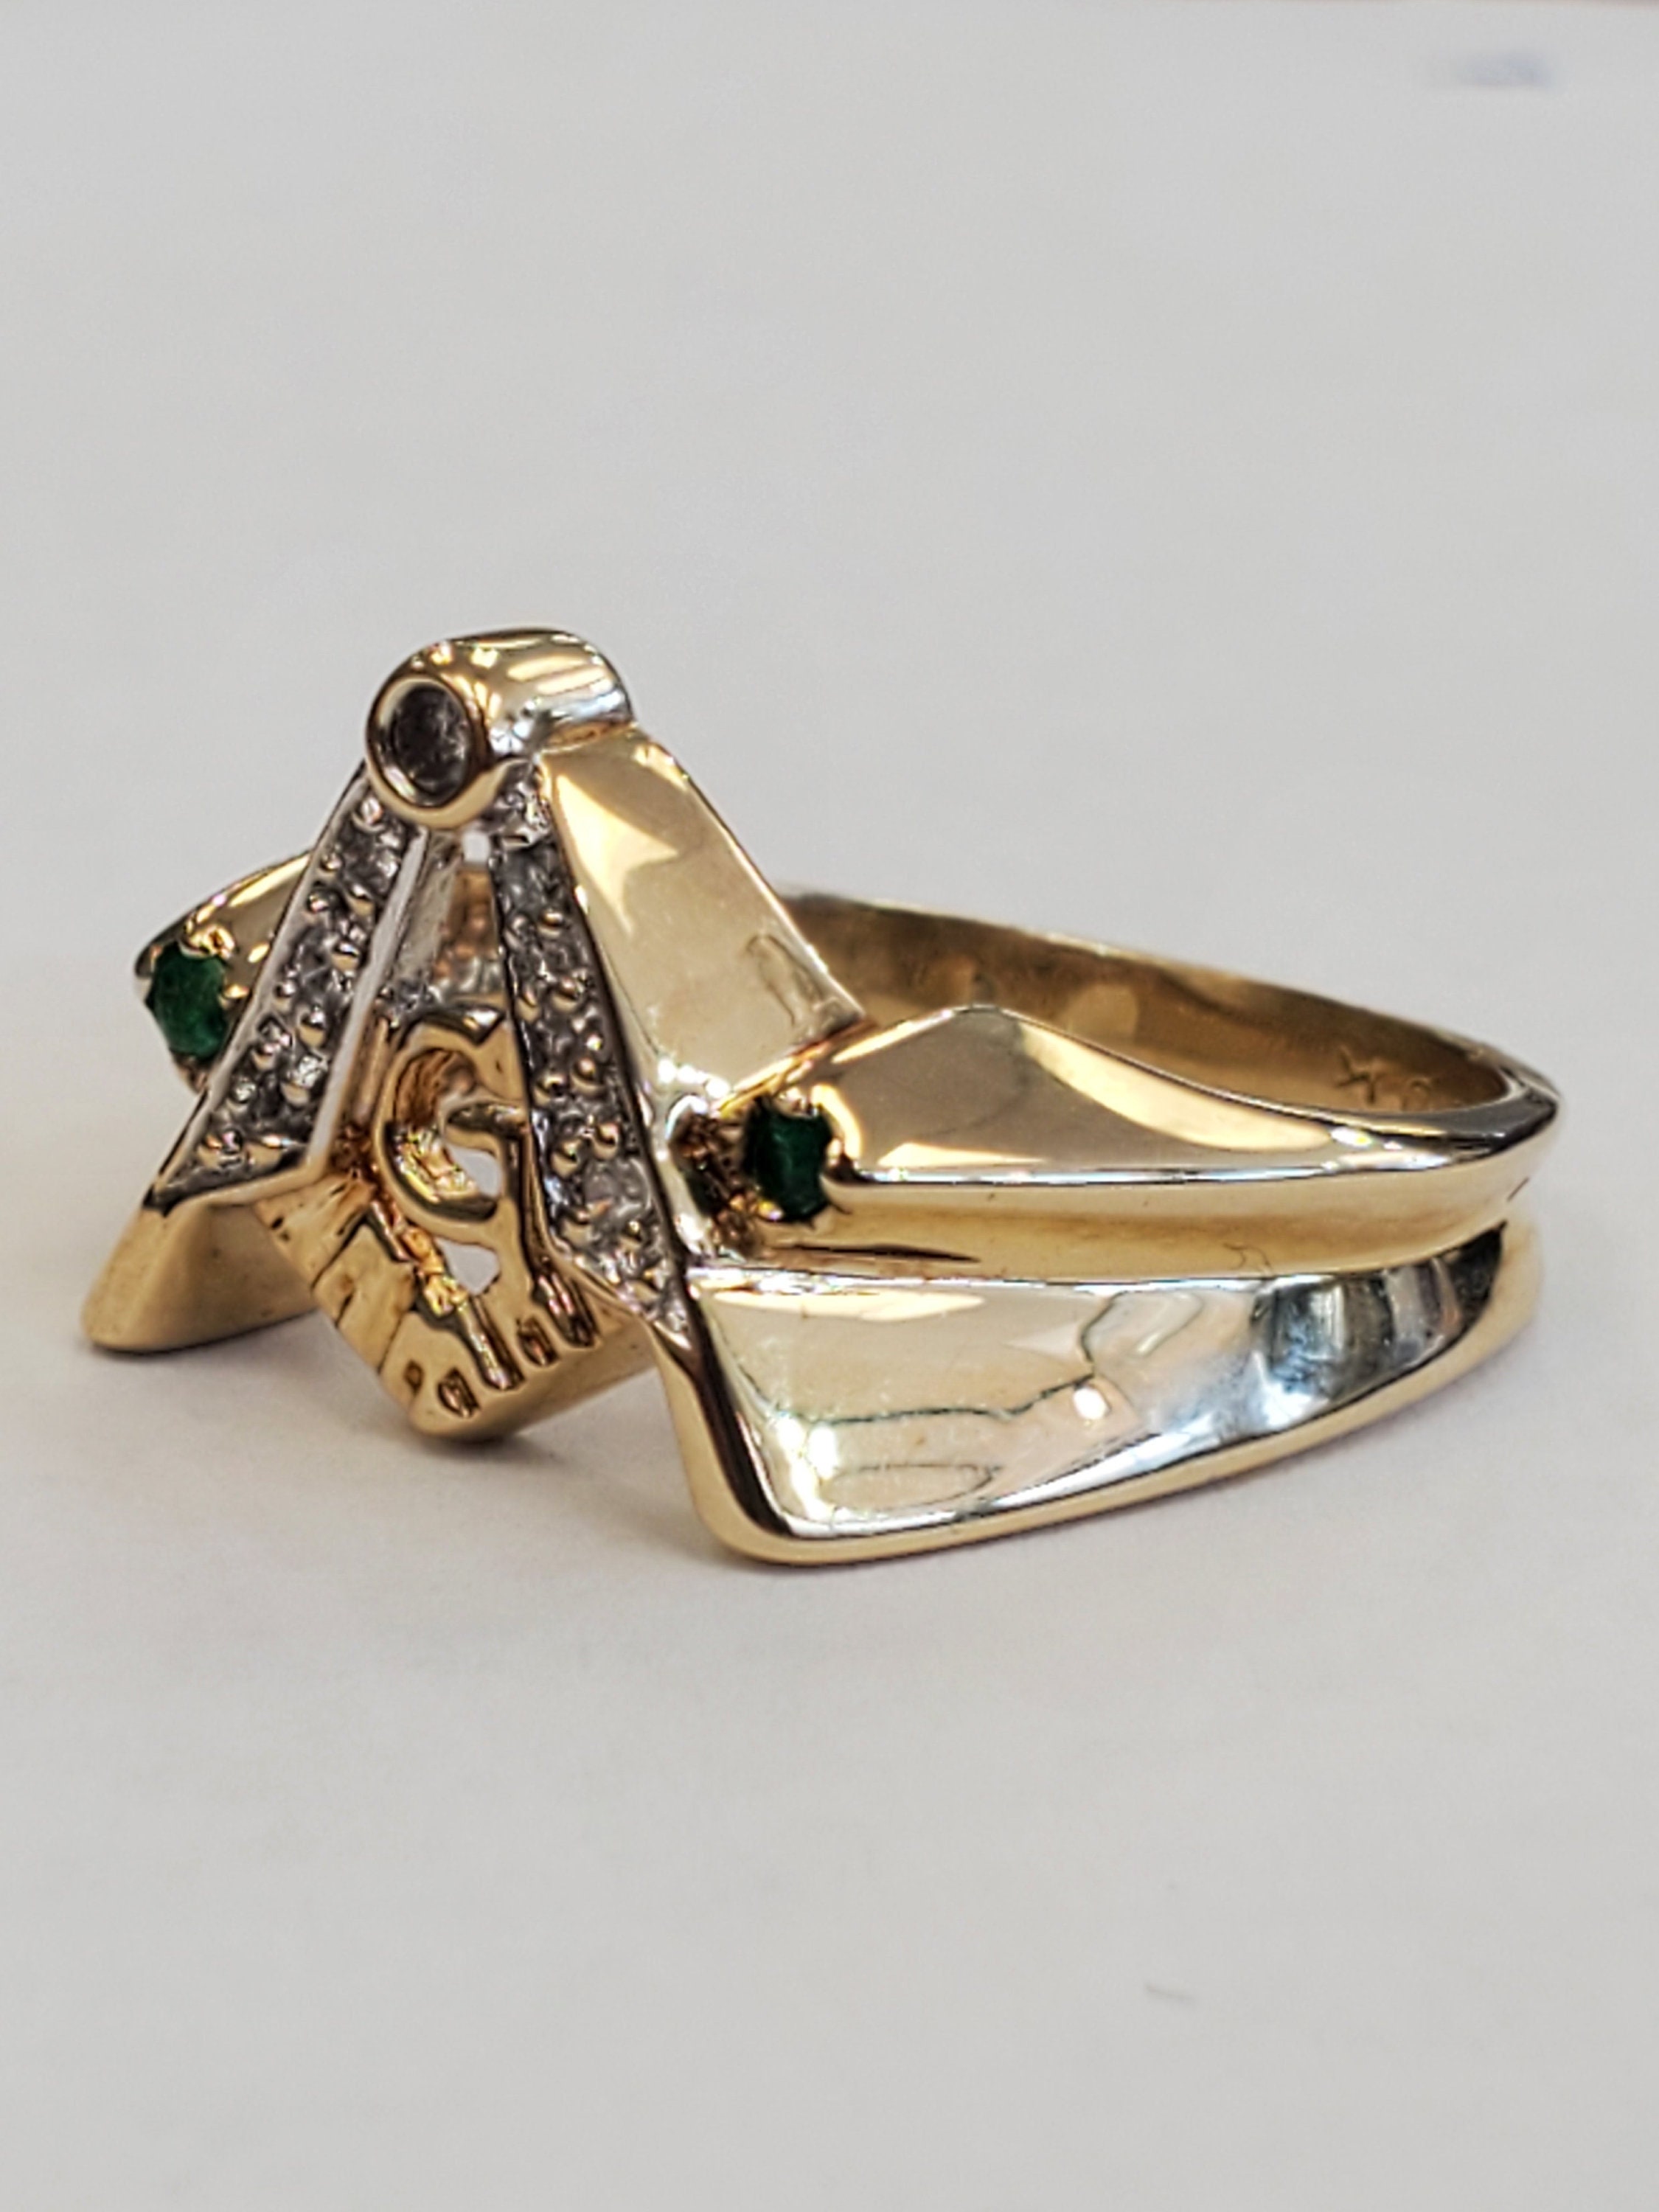 Product Image for Mason Masonic Emerald and Diamond Square and Compass Ring 10k Yellow Gold Size 9